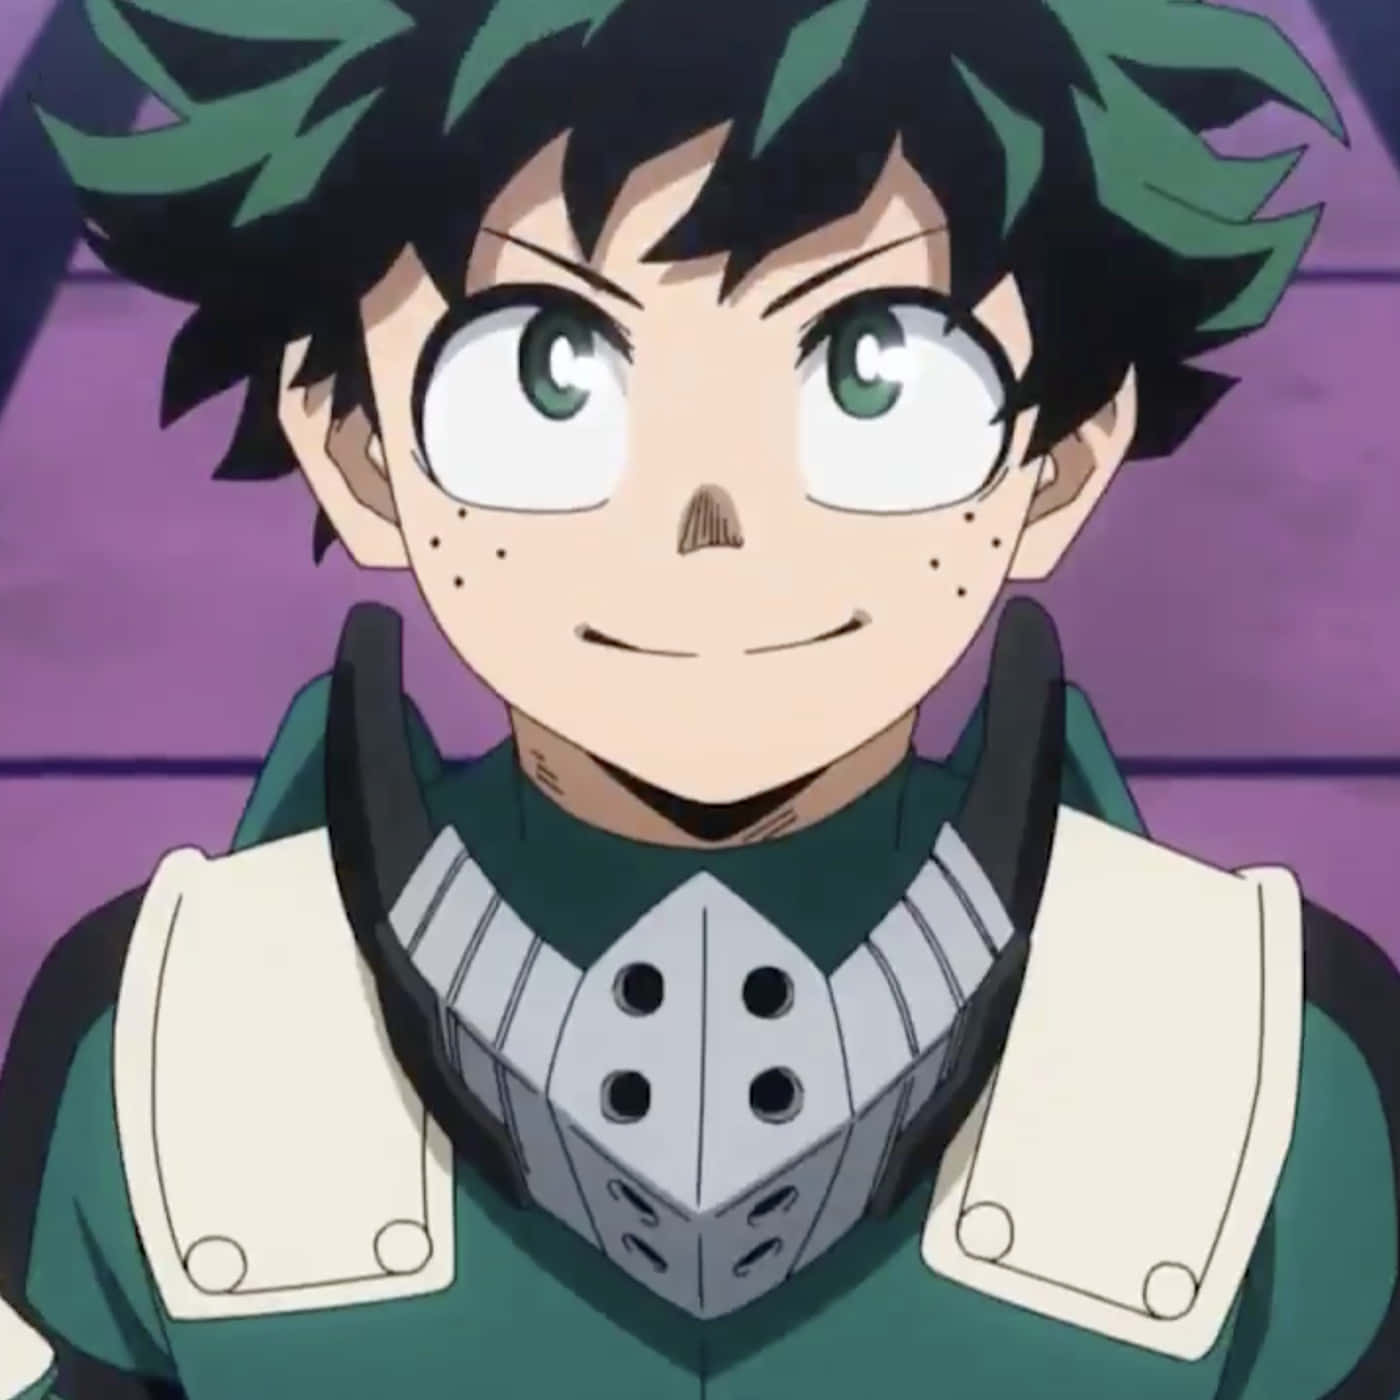 "Experience the thrilling action of My Hero Academia!"